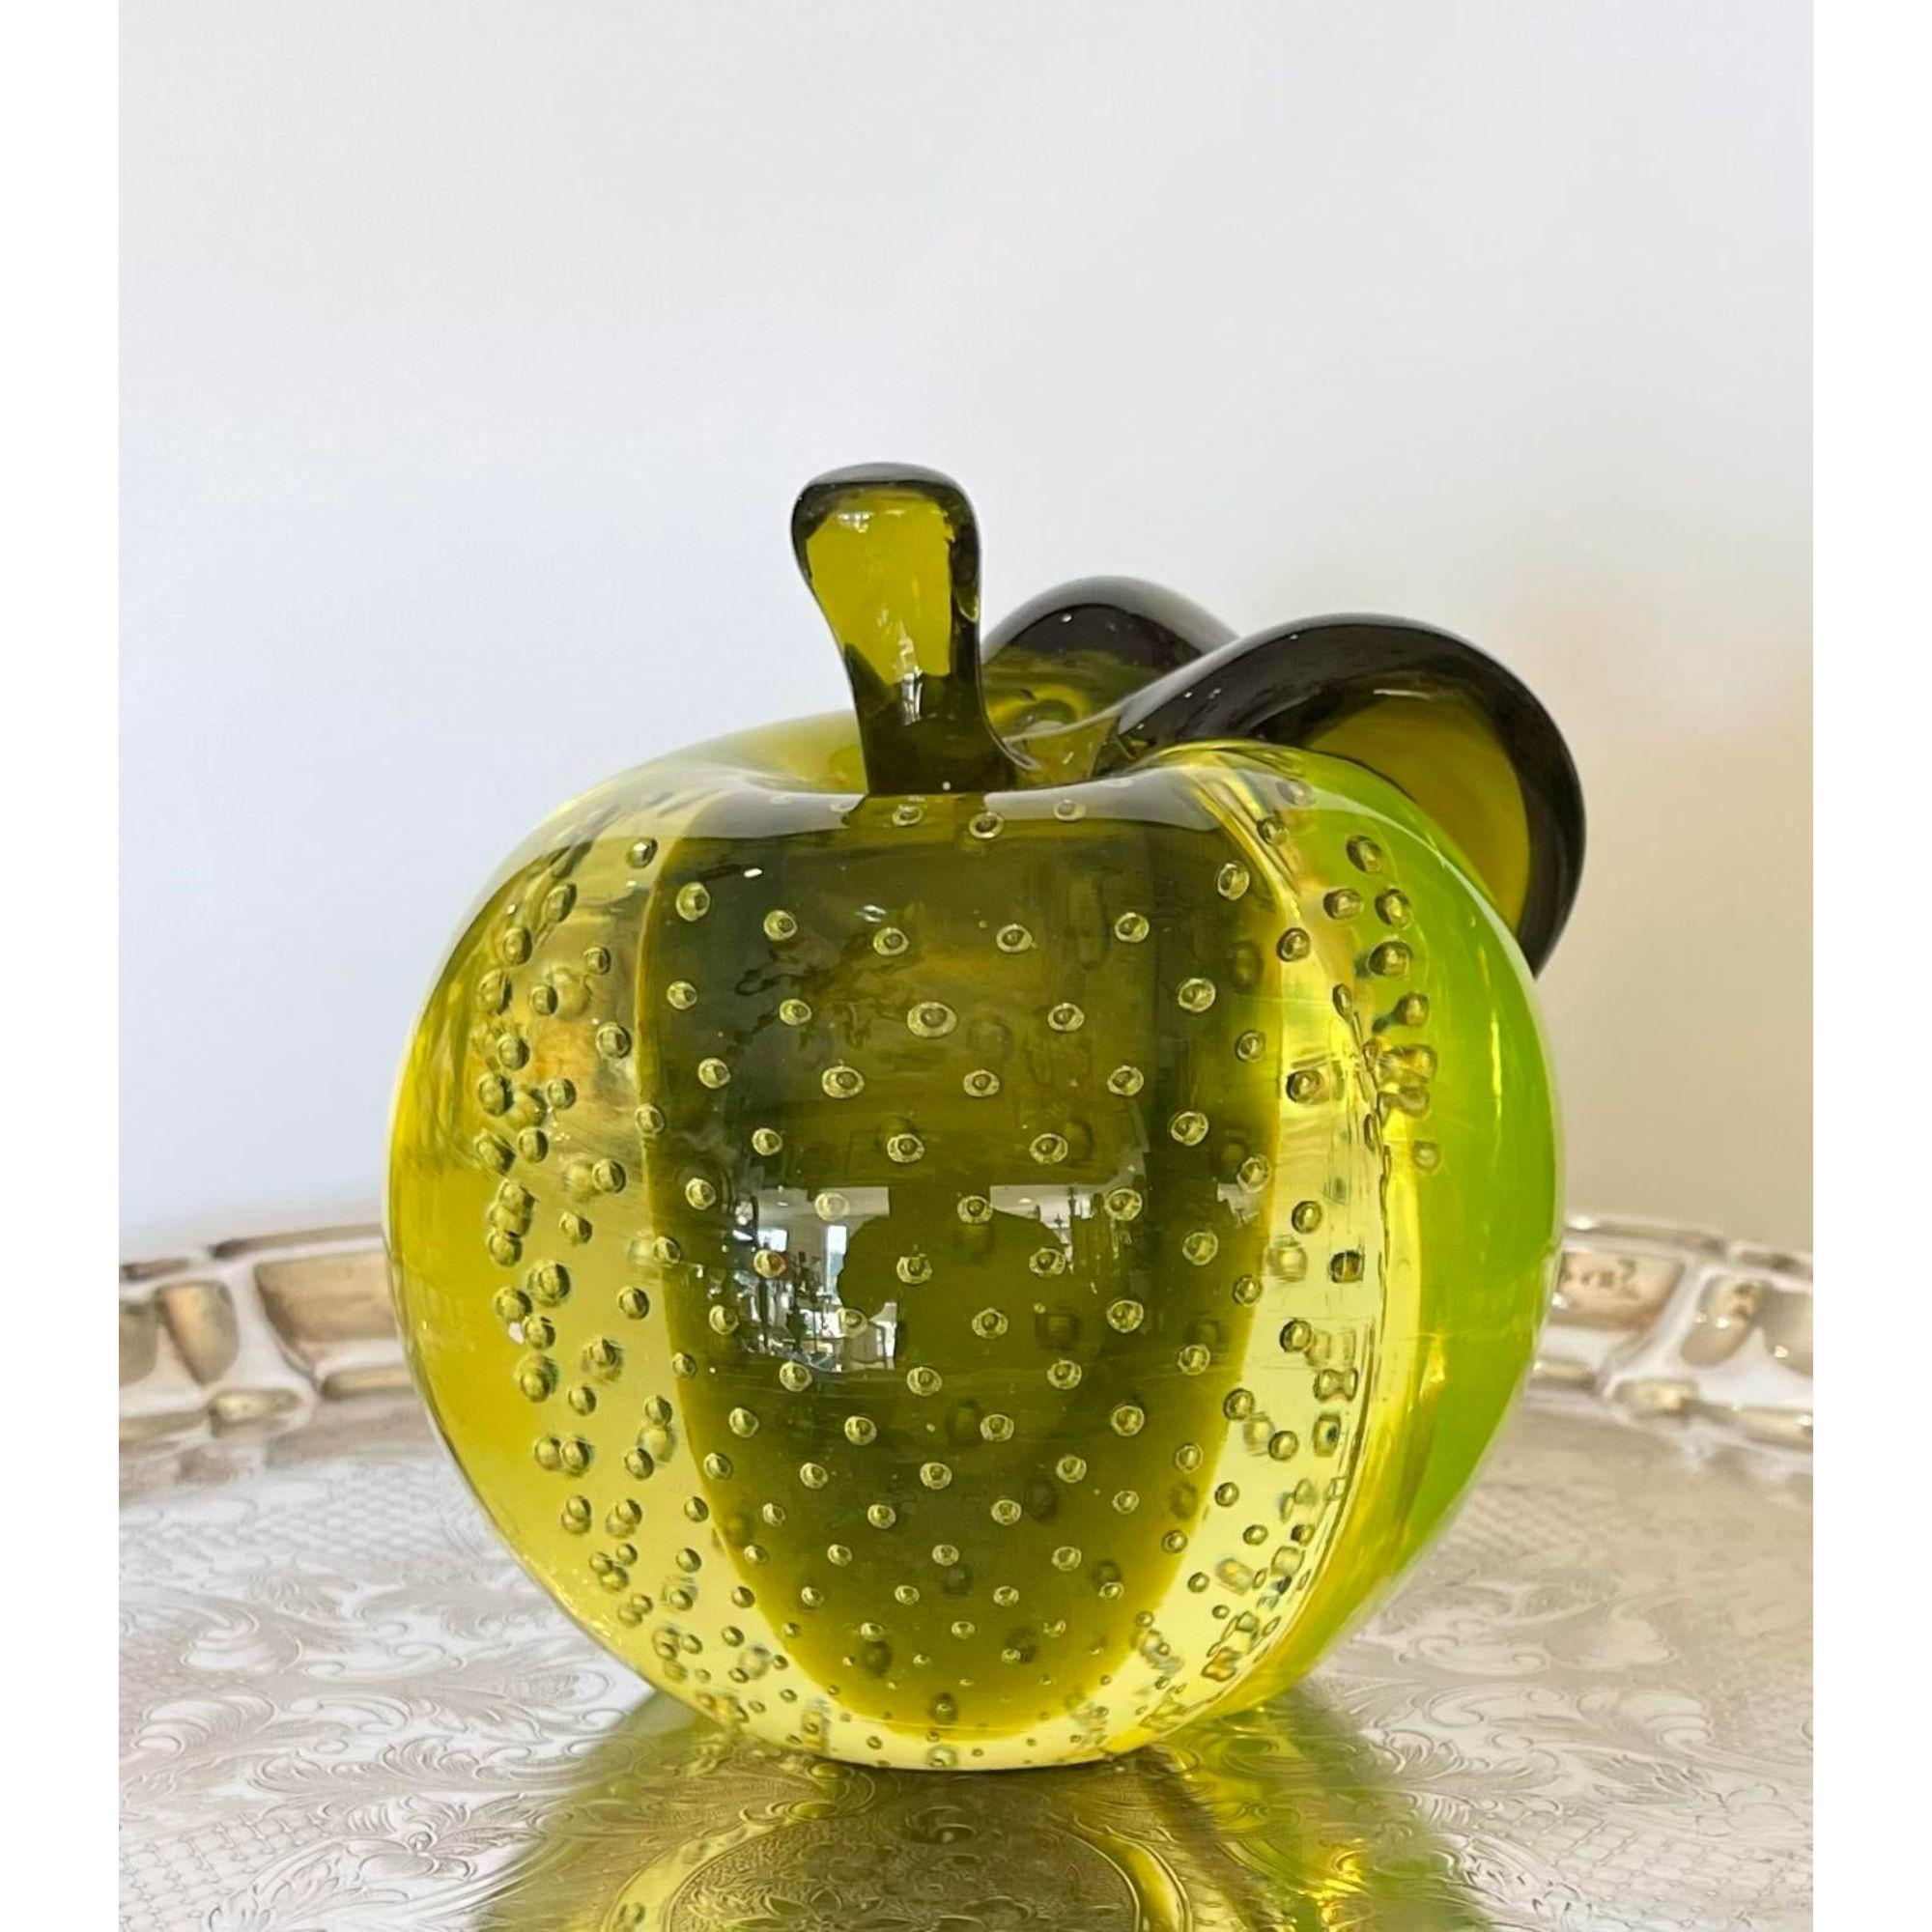 Mid-Century Modern Murano glass Magnum apple paperweight. It glows brightly under black light testing and dates to the 1950s

Additional information: 
Materials: Murano glass
Color: Chartreuse
Brand: Murano
Designer: Seguso
Period: